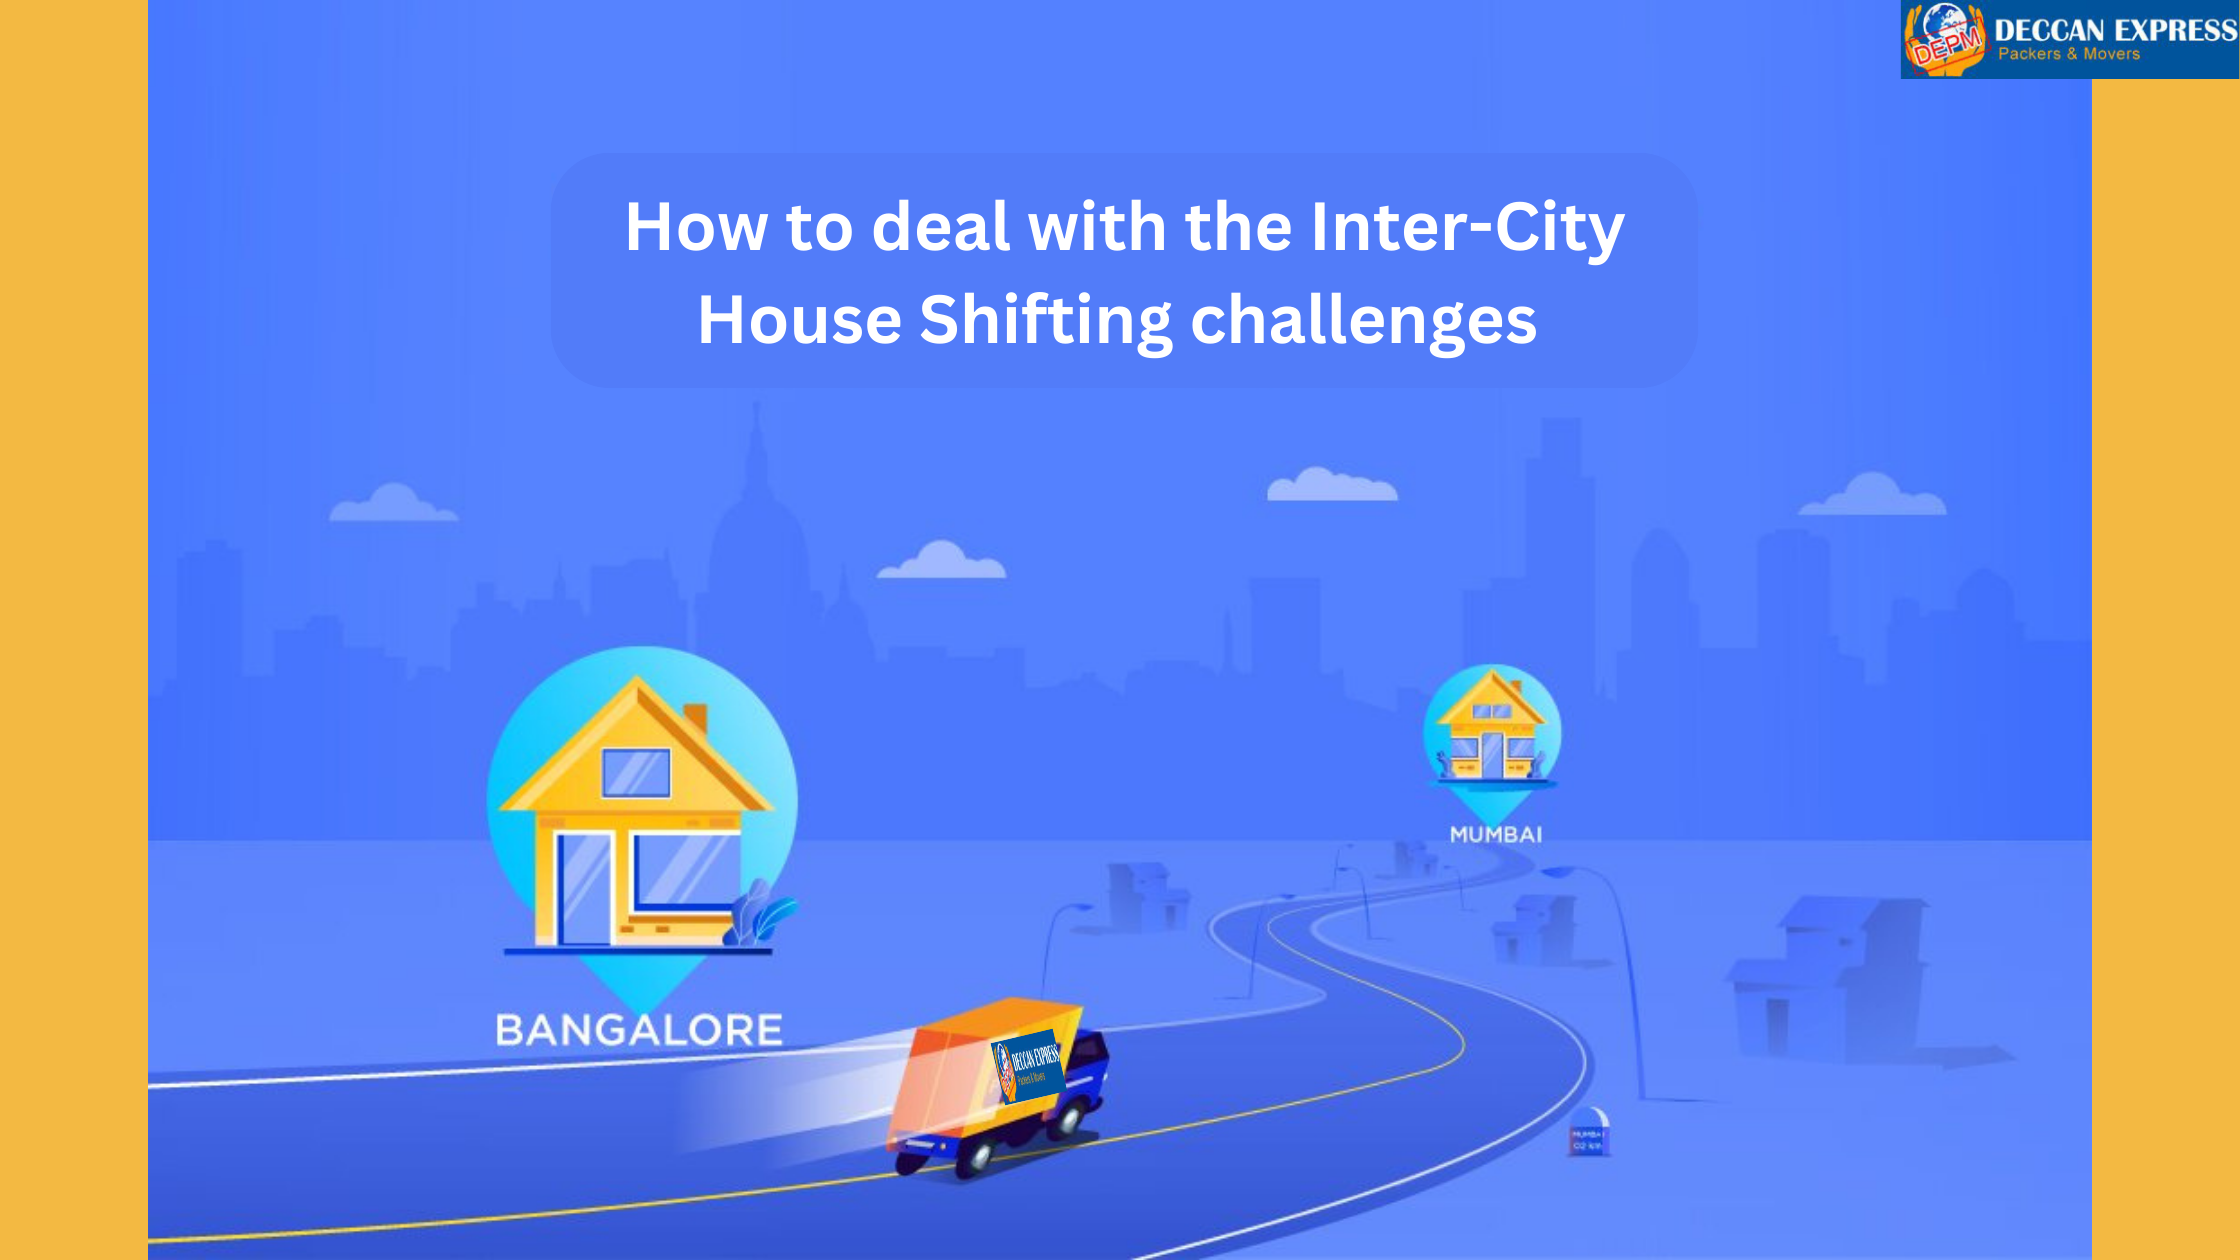 How to deal with the Inter-City House Shifting challenges